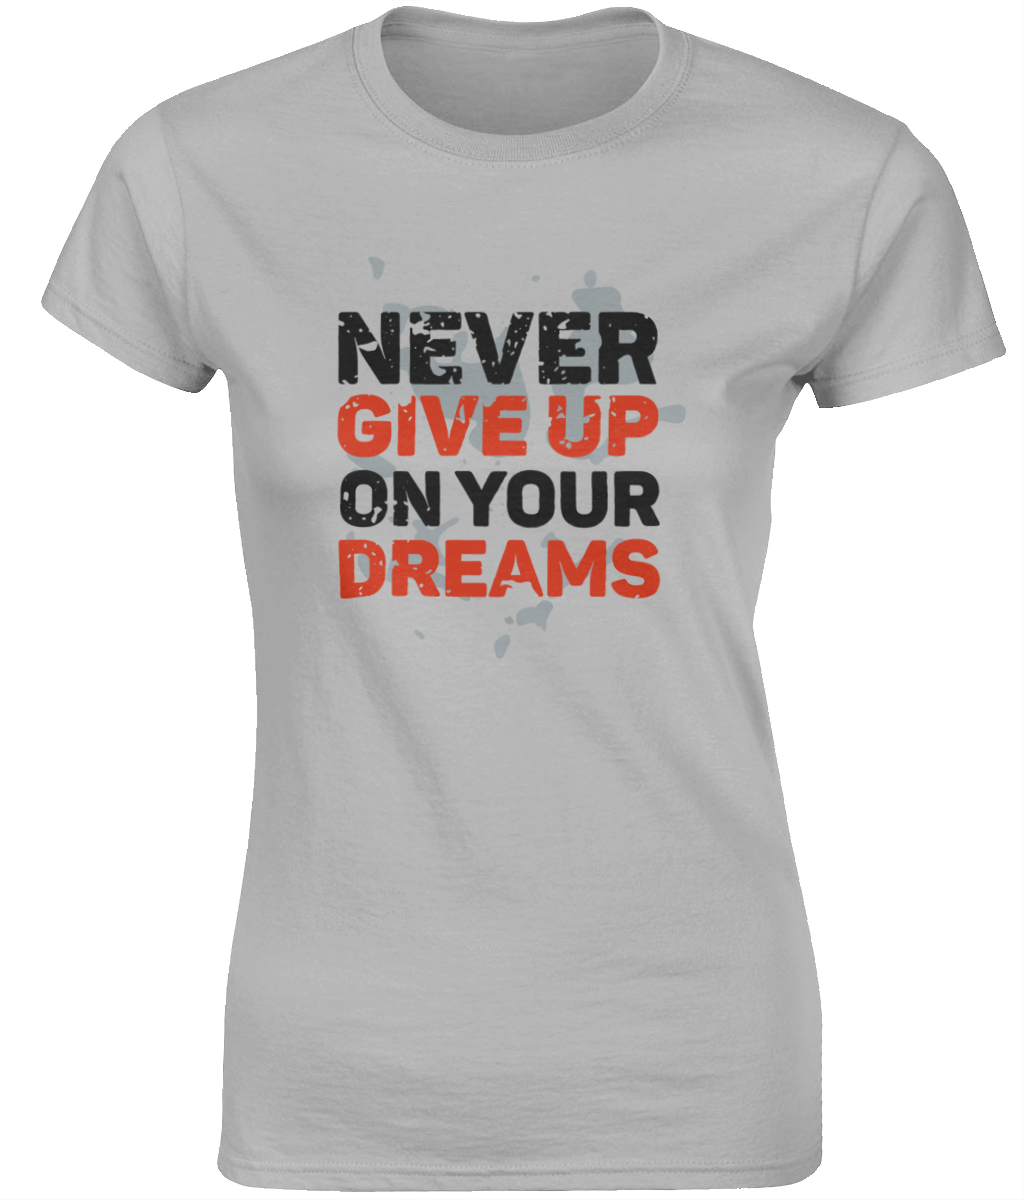 Never Give Up On Your Dreams | Gildan SoftStyle® Ladies Fitted Ringspun T-Shirt.